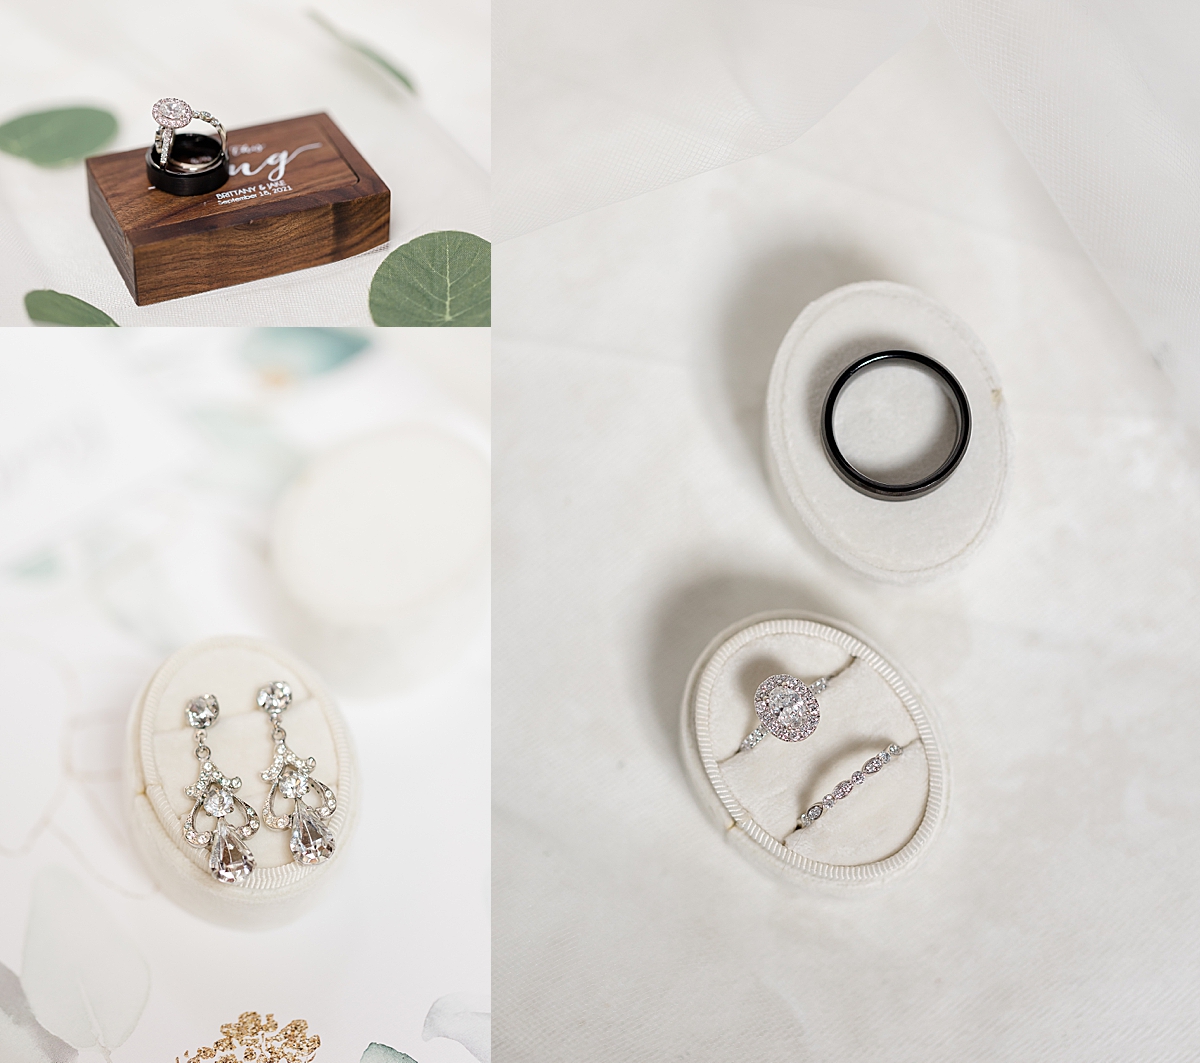 rings in ring boxes on detail flat lay photo with wedding bands and diamond engagement ring 